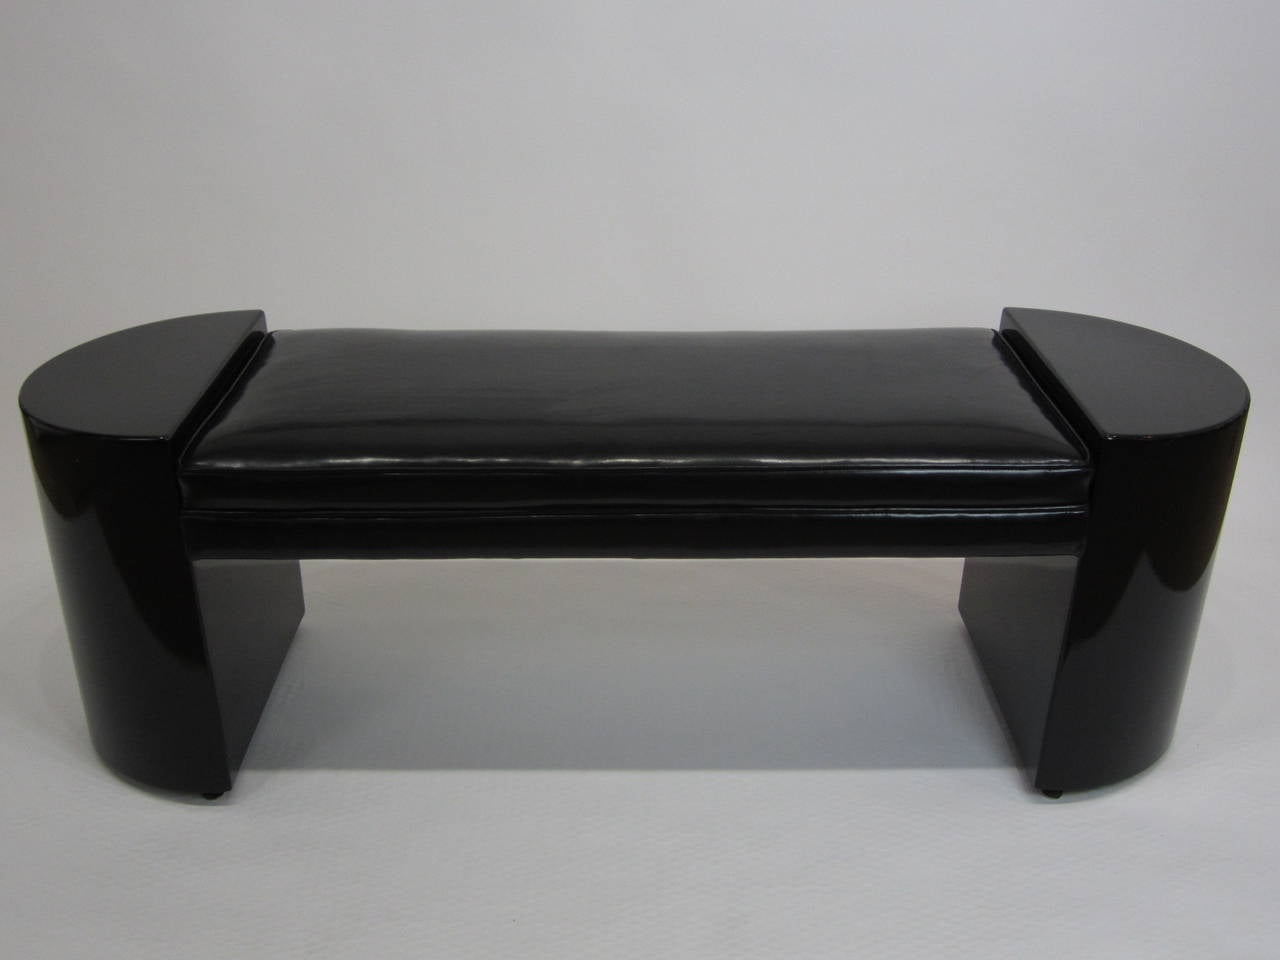 Beautiful gloss black lacquered Demilune bench with black patent leather cushion. Fabulous elongated design with centre cushion. Sides are composition and have great adjustable levelers on bottom. Shows minor wear commensurate with age.